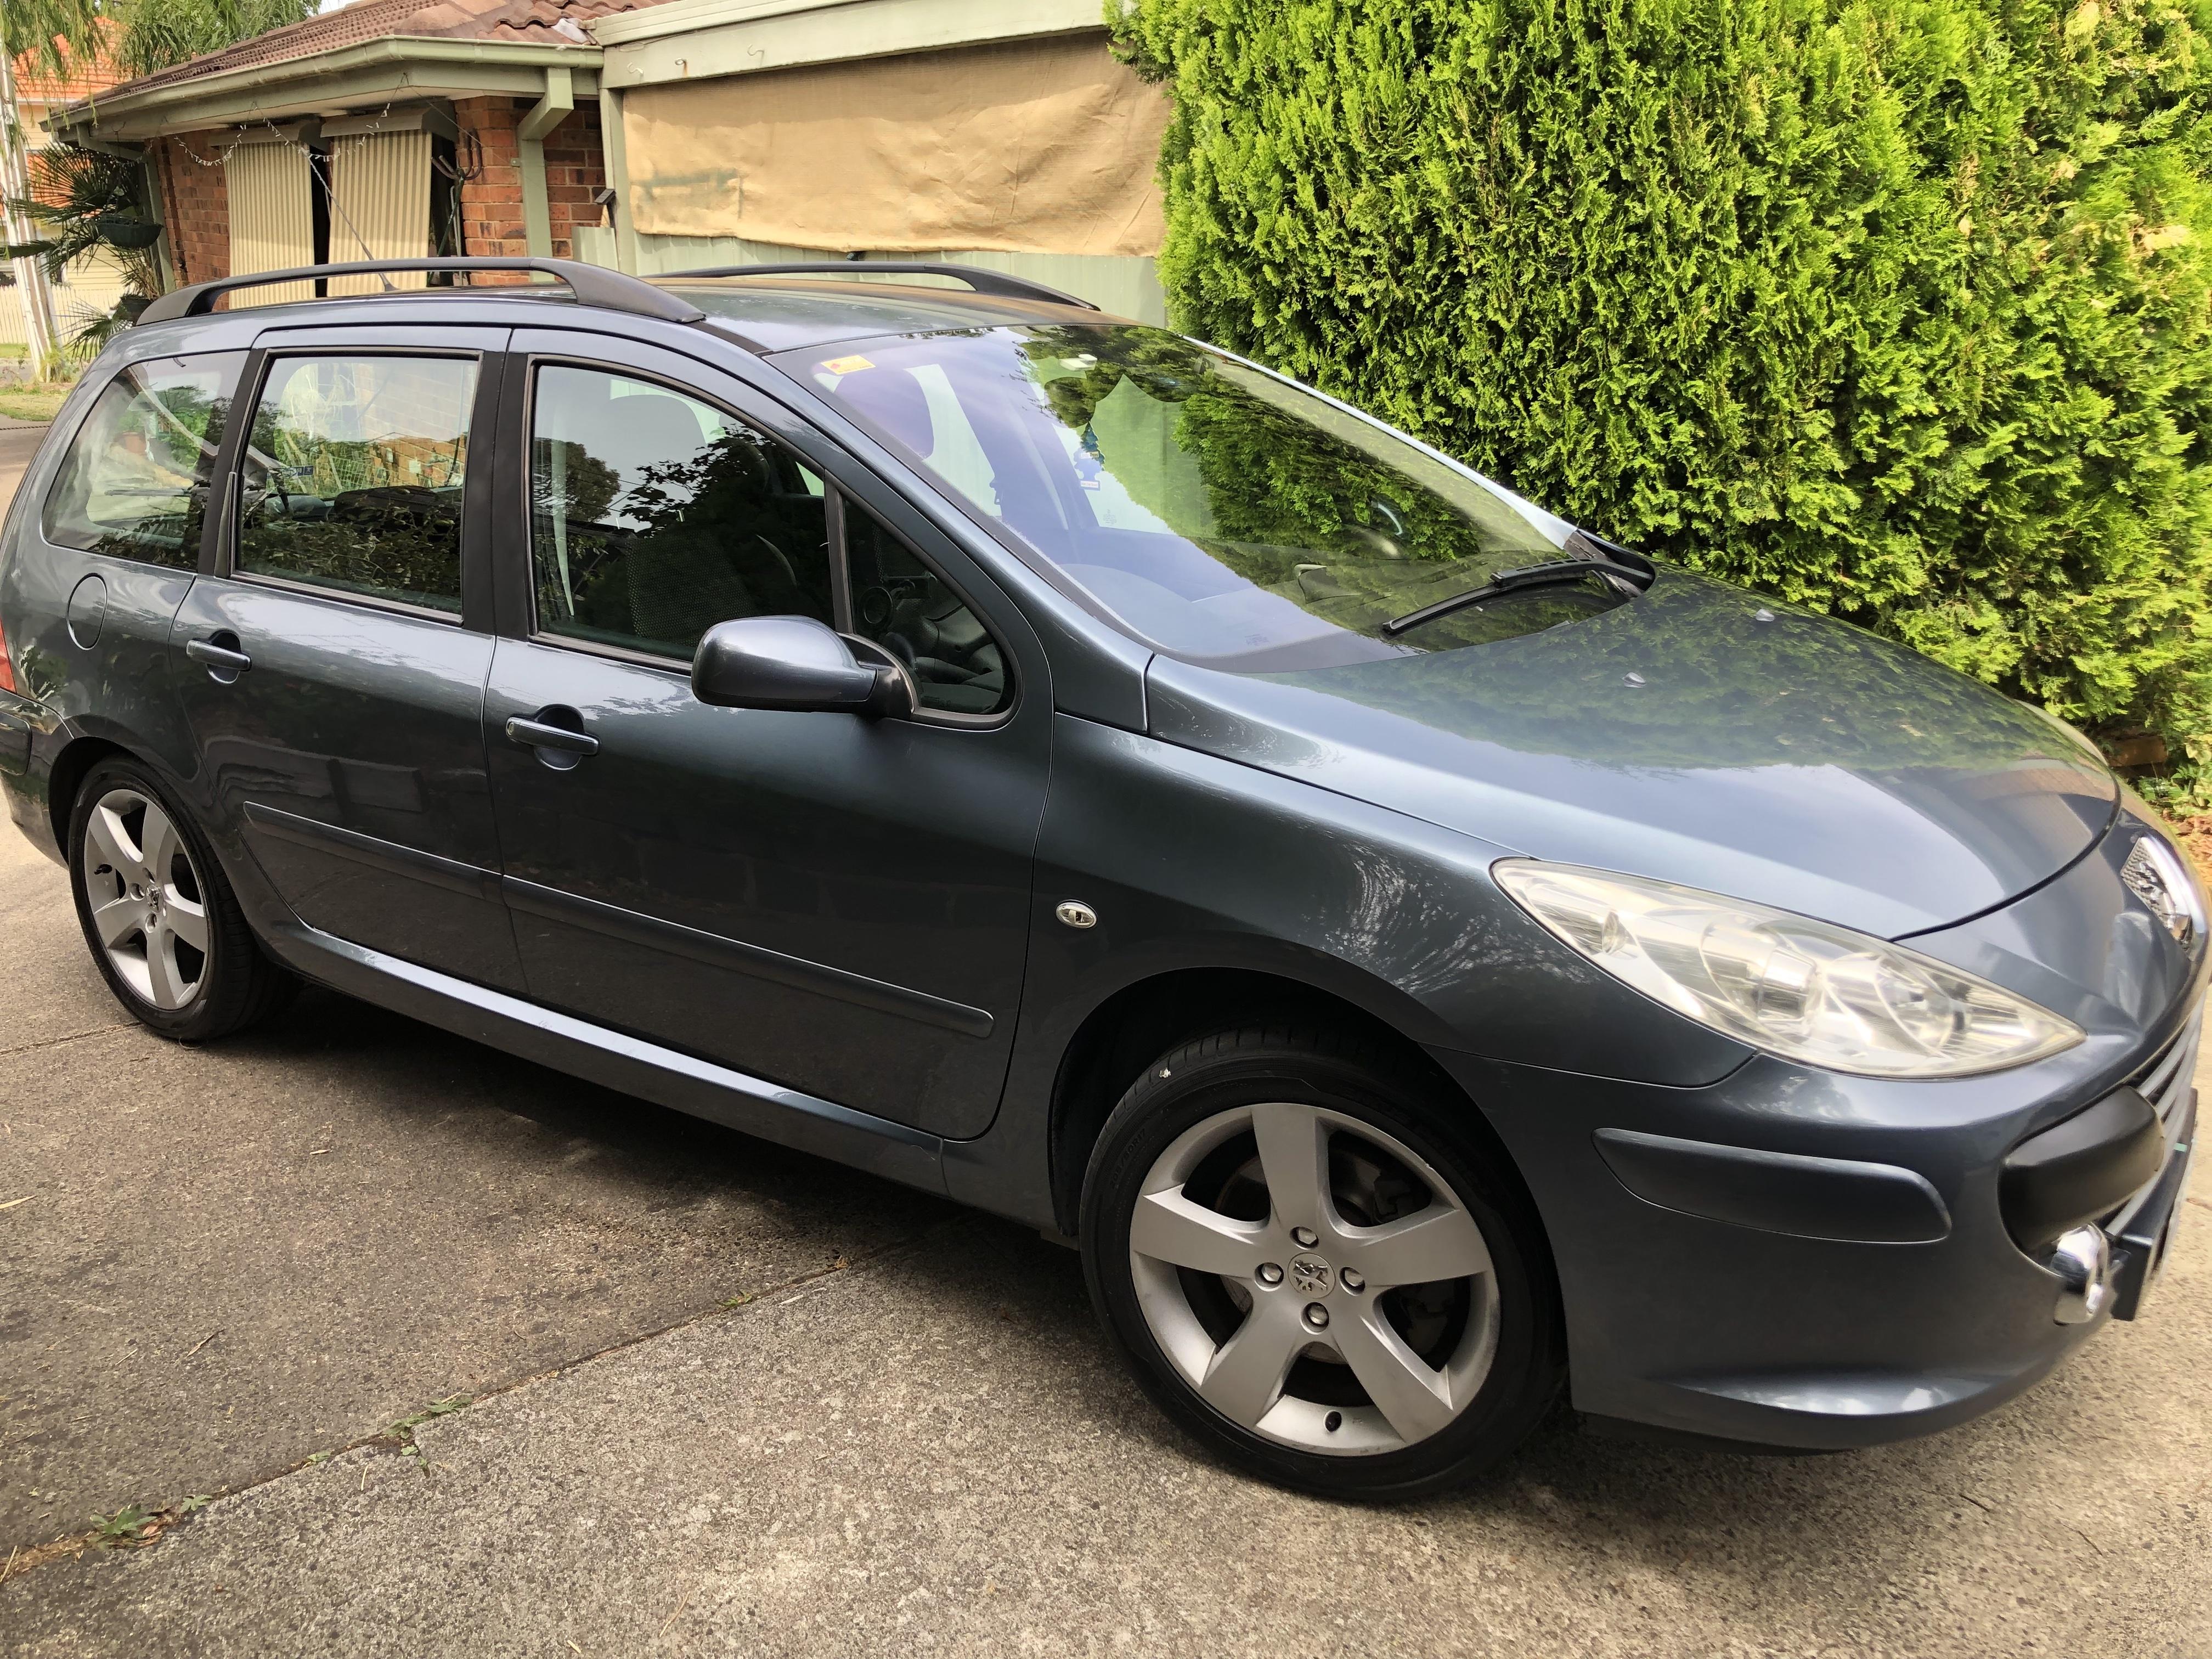 2008 Peugeot 307 HDI Wagon owner review